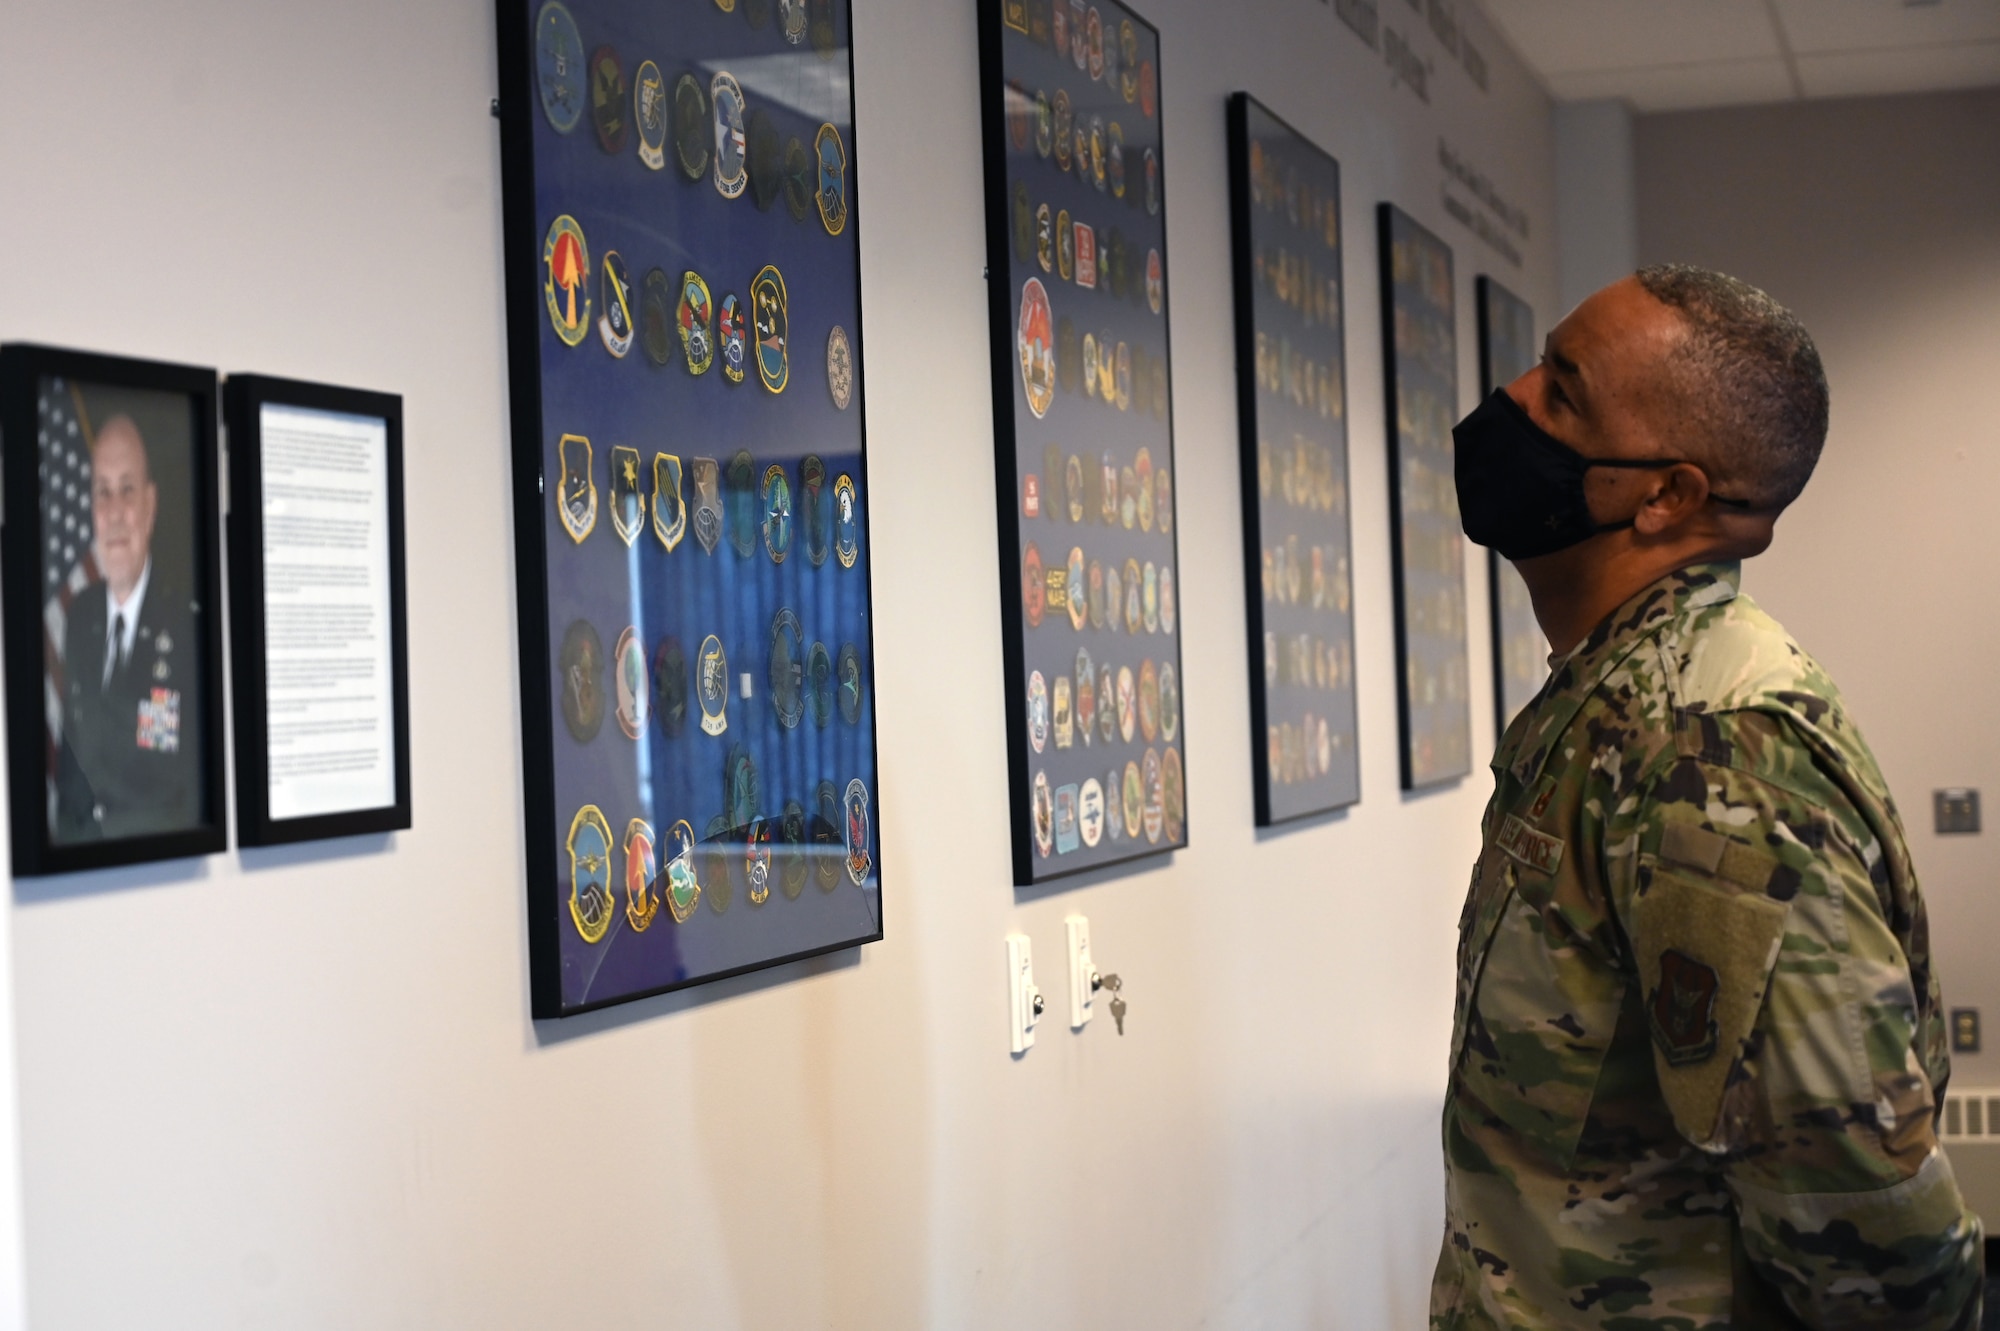 Chief Master Sgt. Timothy C. White, the Air Force Reserve Command Chief, looks at the wall of historical patches in the 32nd Aerial Port Squadron at the Pittsburgh International Airport Air Reserve Station, Pennsylvania, Jan. 8, 2022.